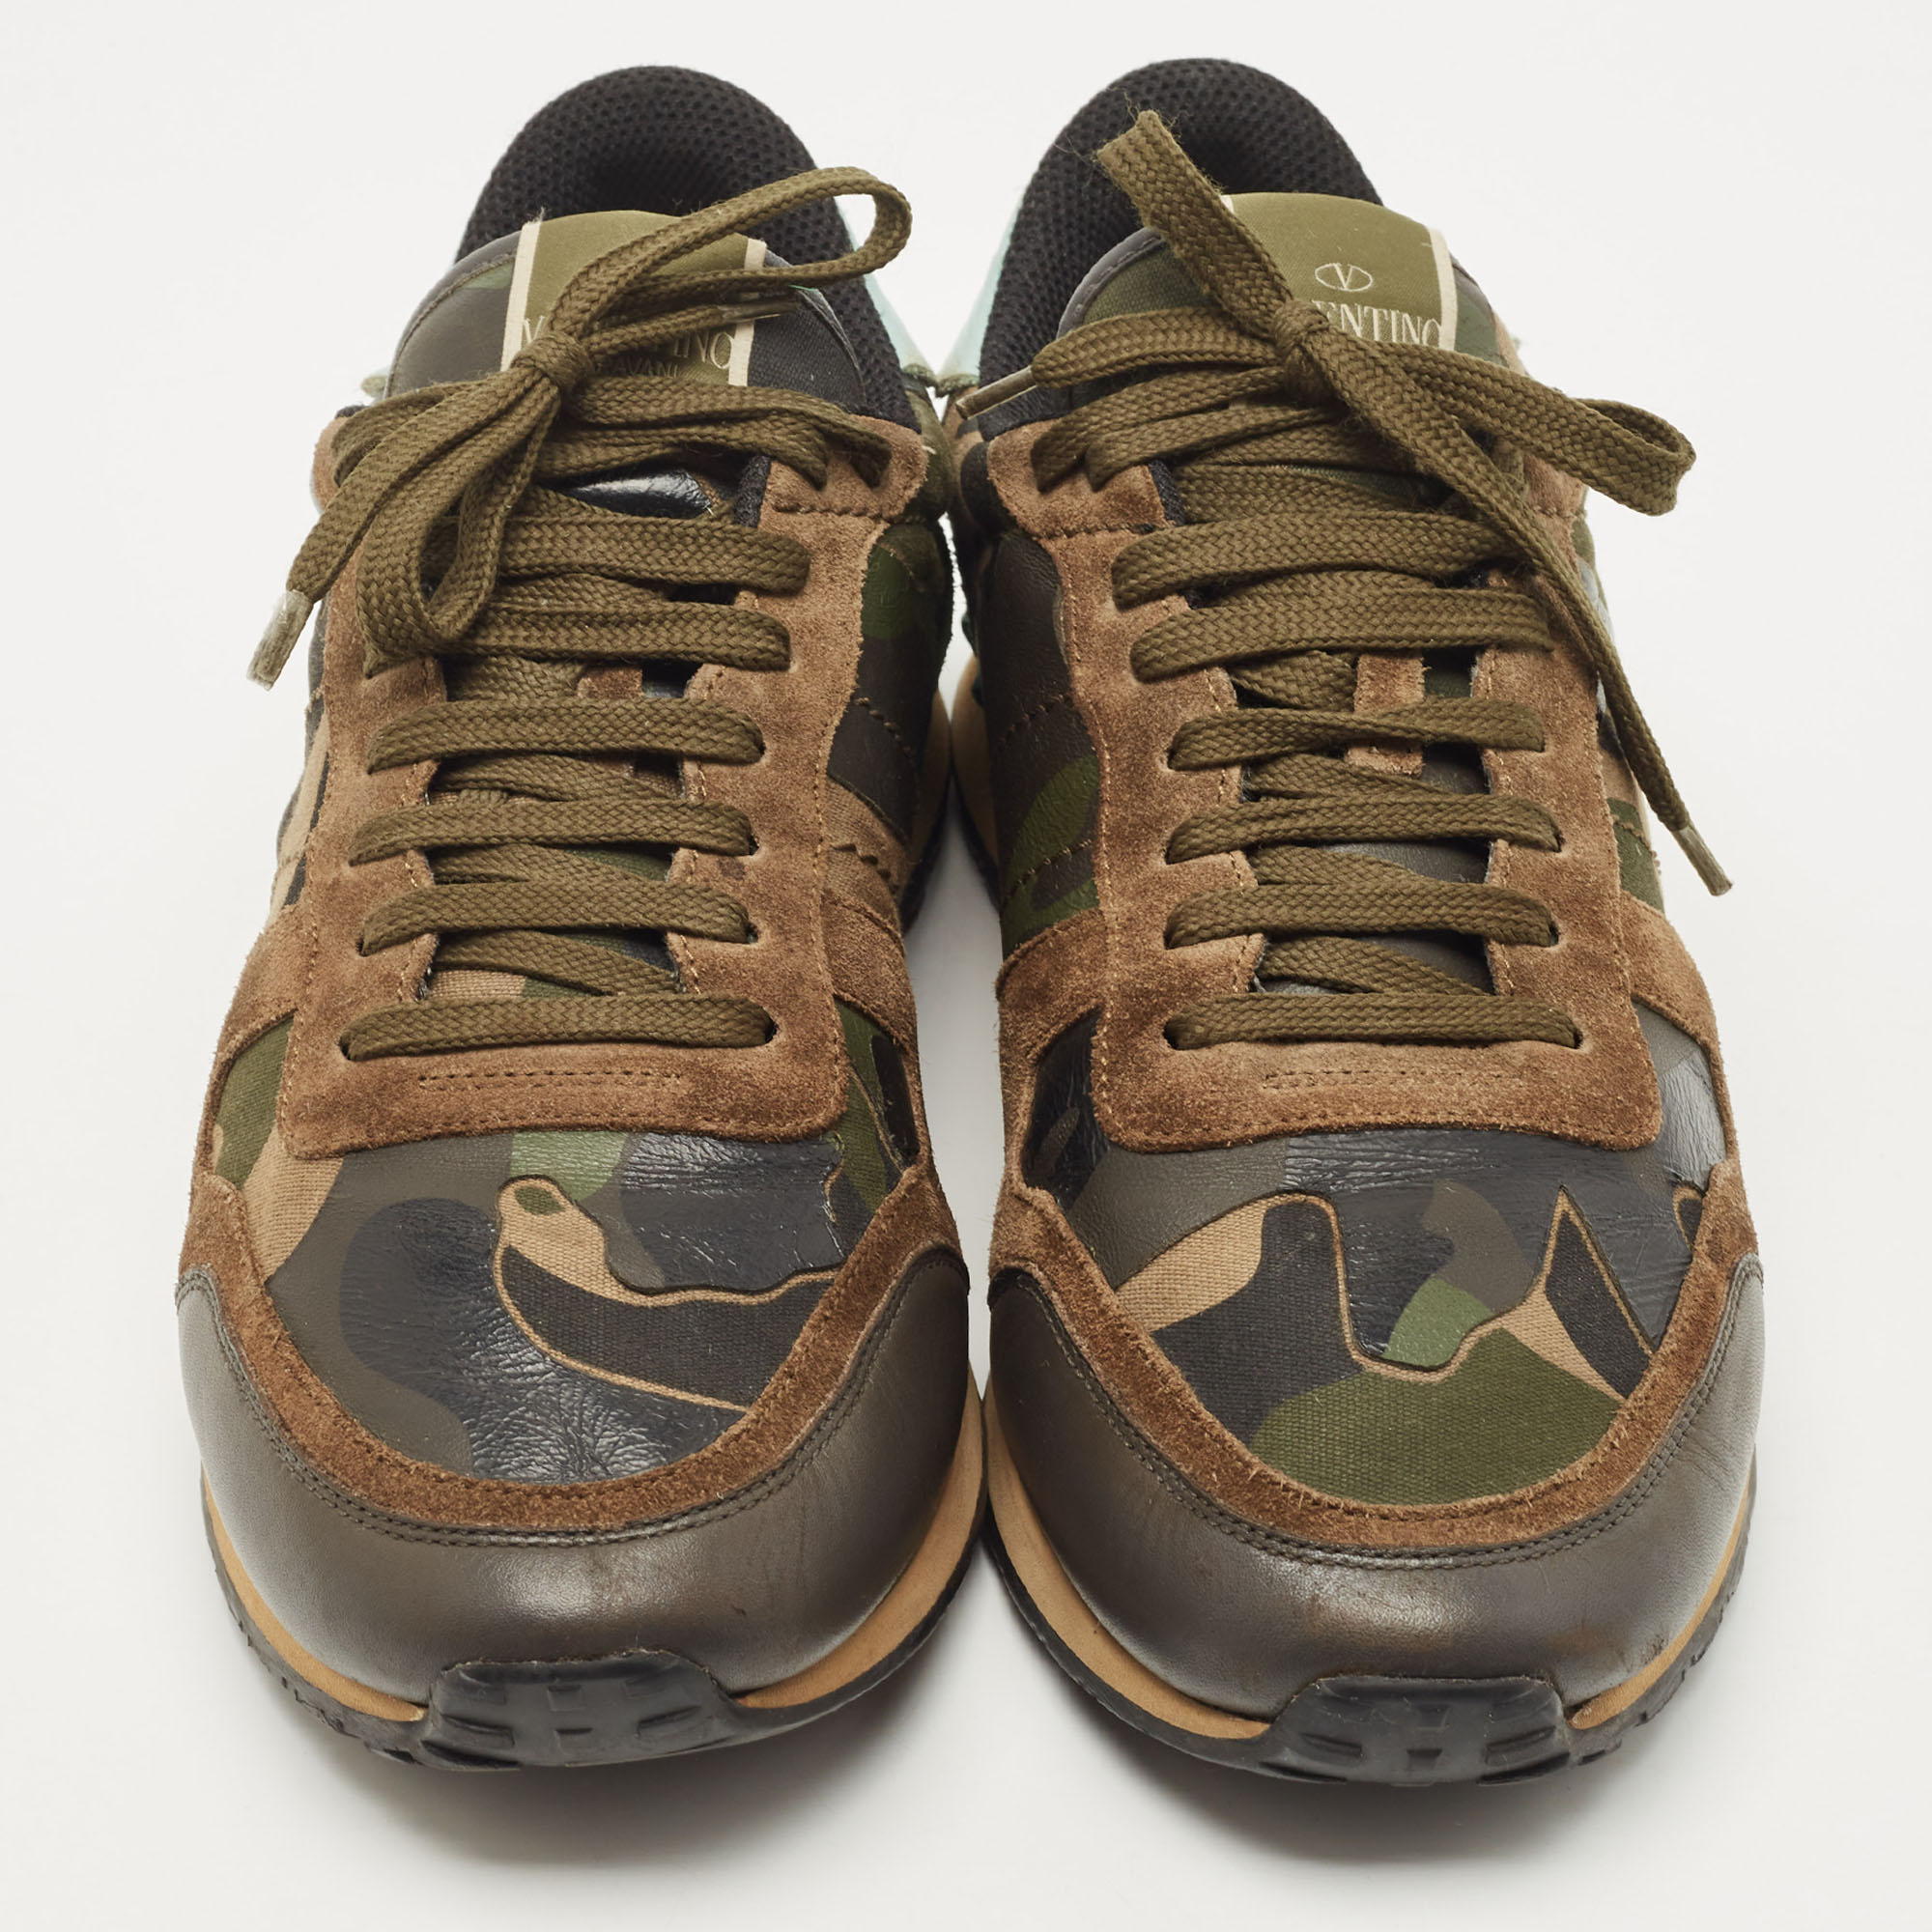 Valentino Tricolor Camo Print Canvas And Leather Rockrunner Sneakers Size 43